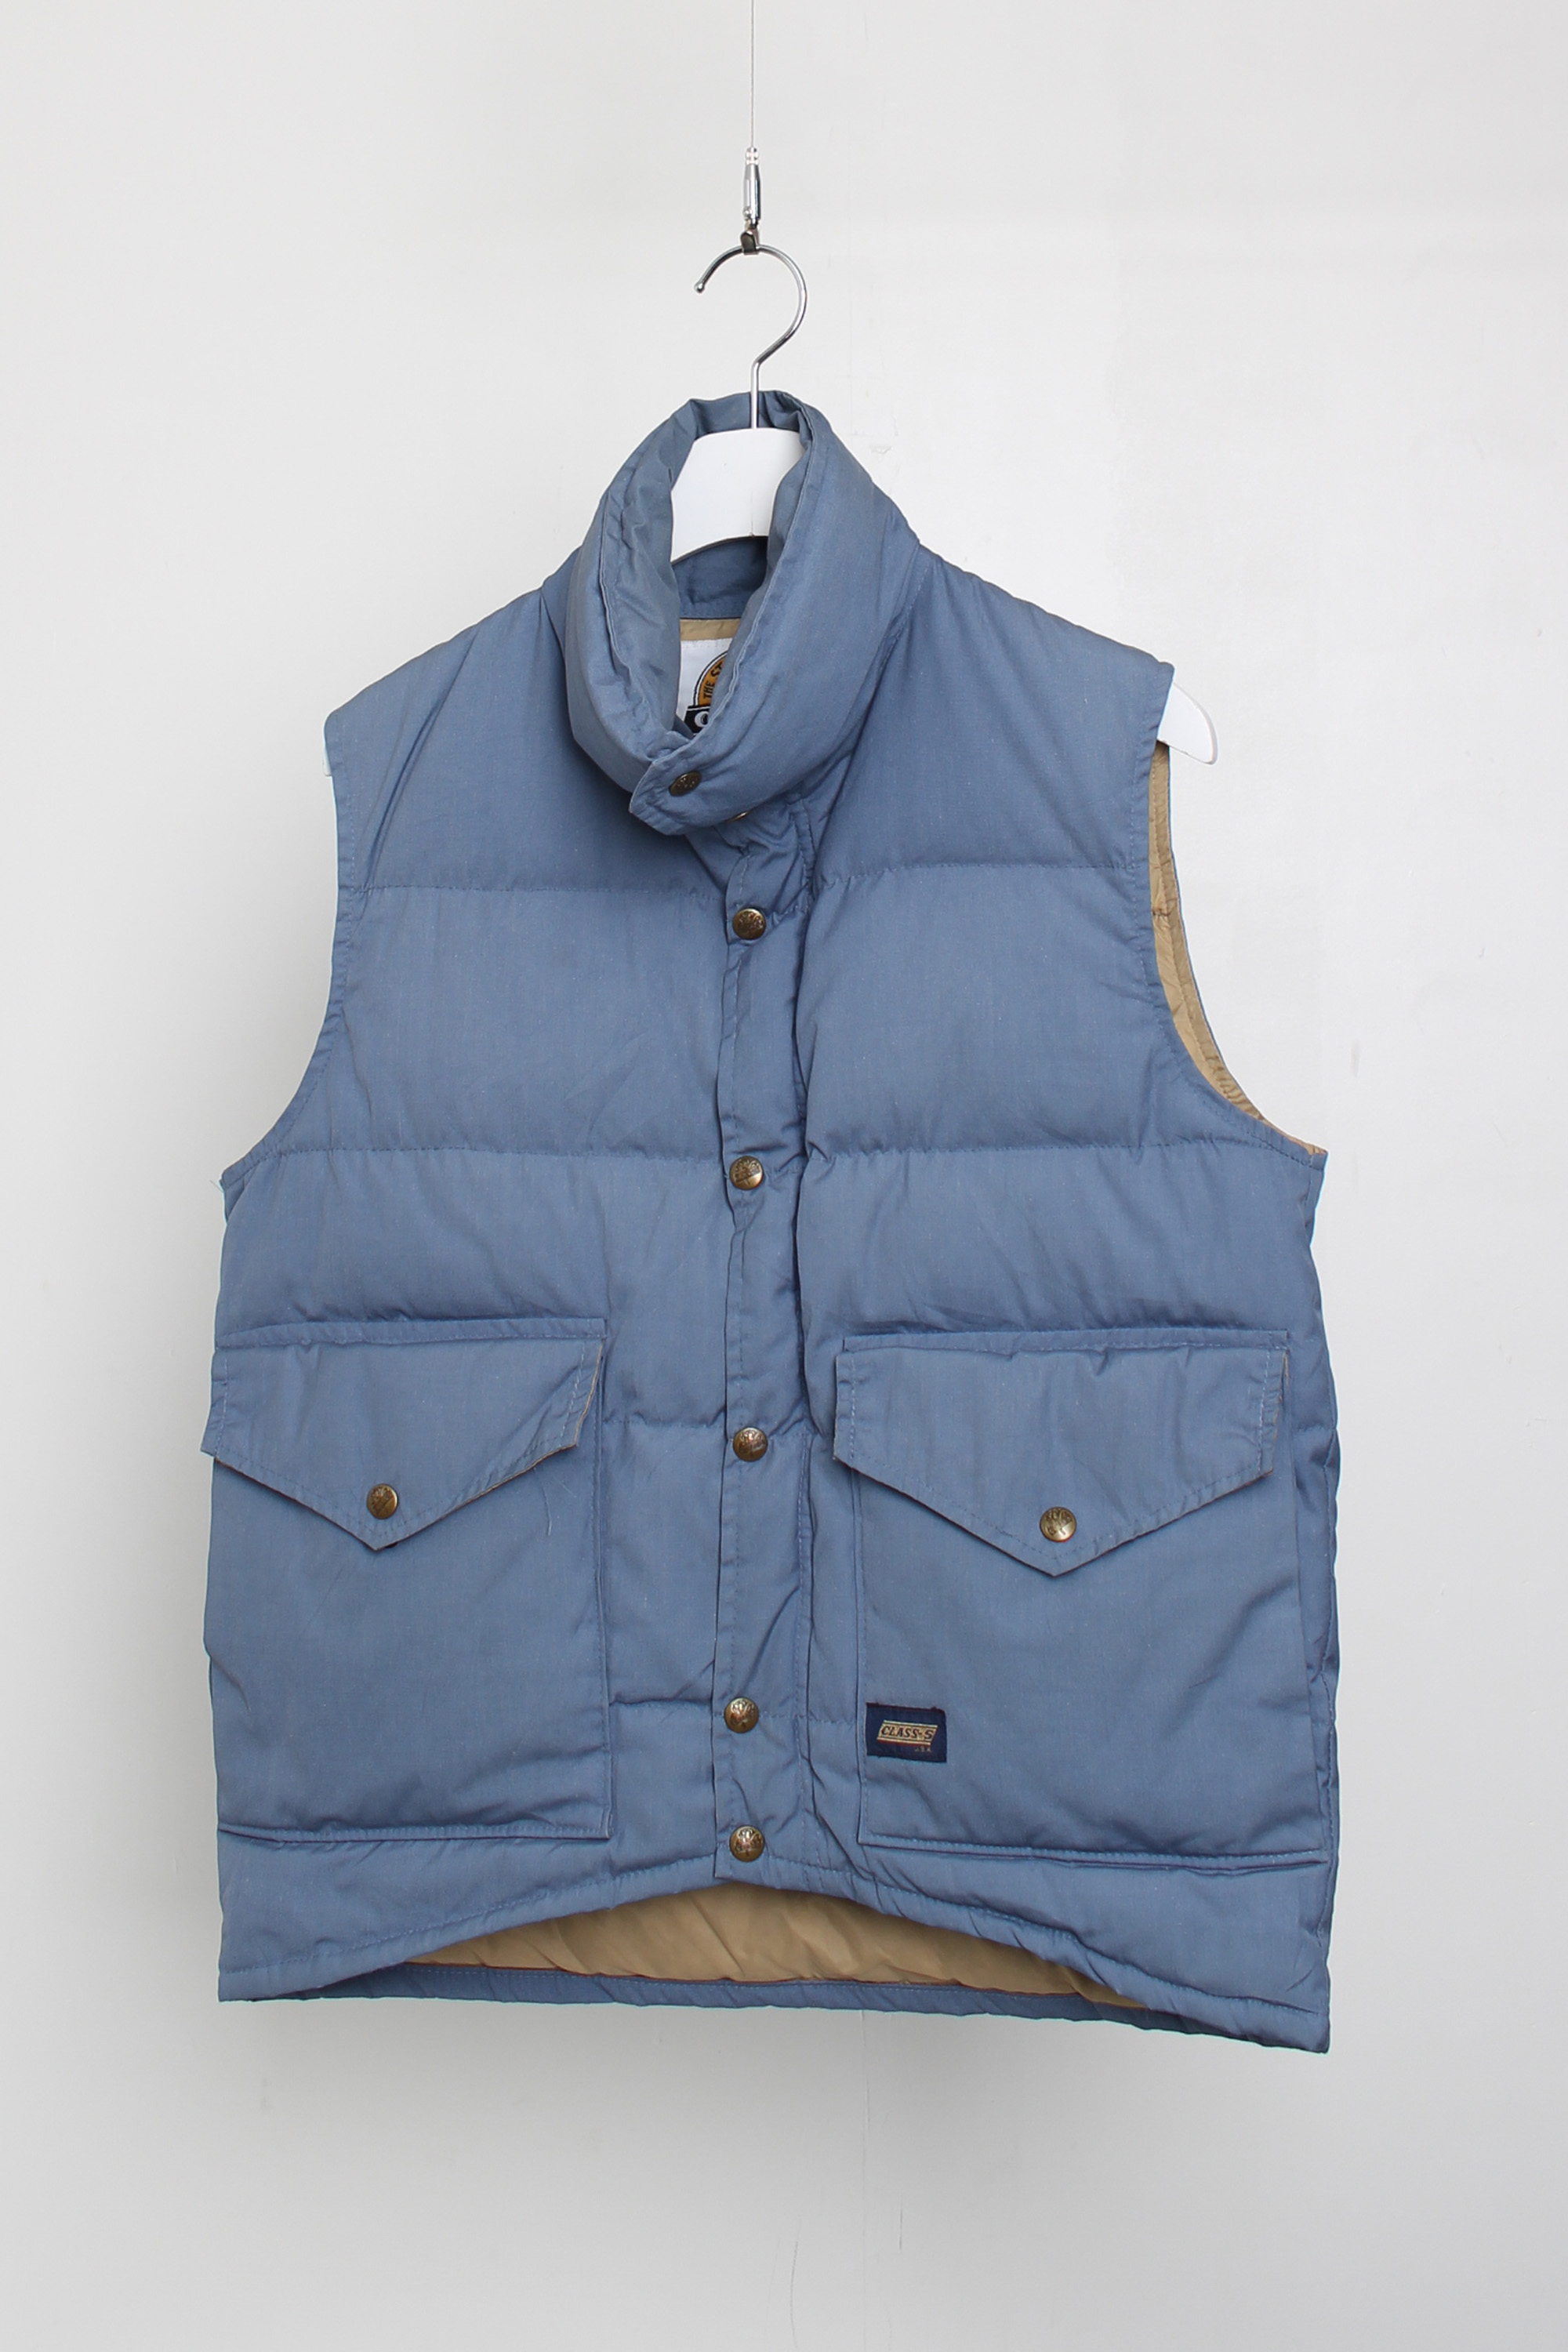 CLASS 5 down vest(made in usa)